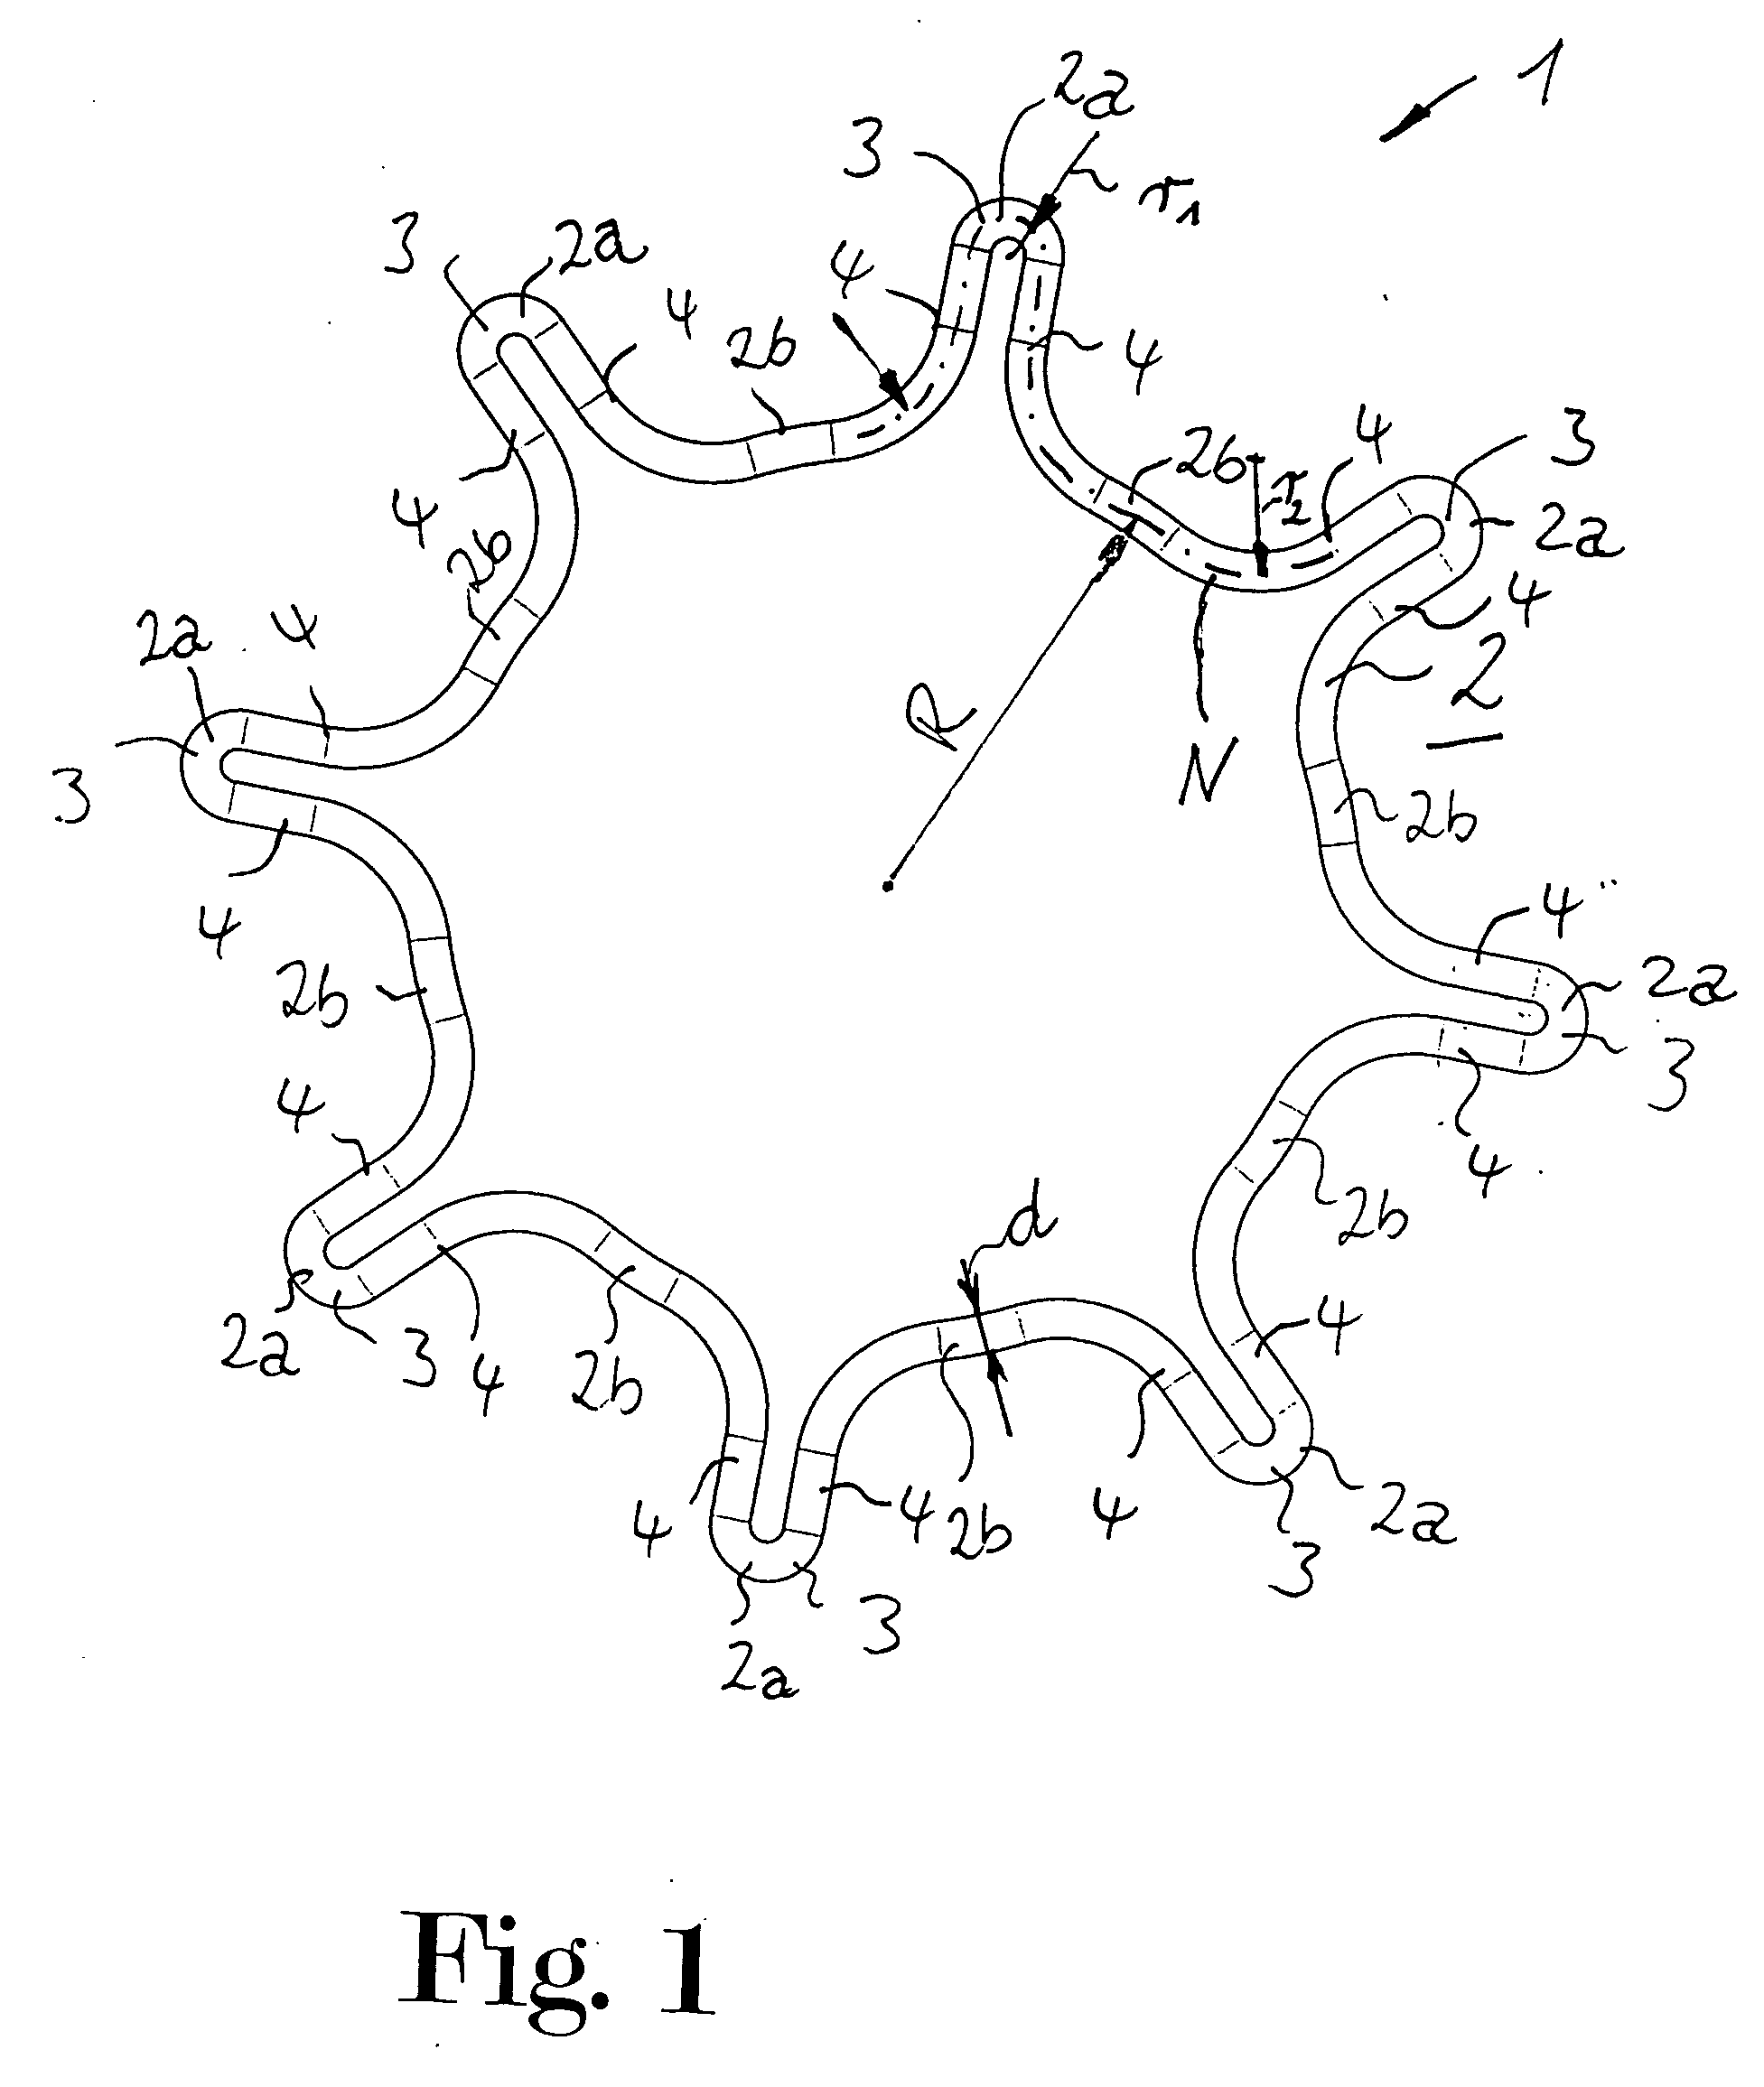 Assembly comprised of a brake disk with a hub